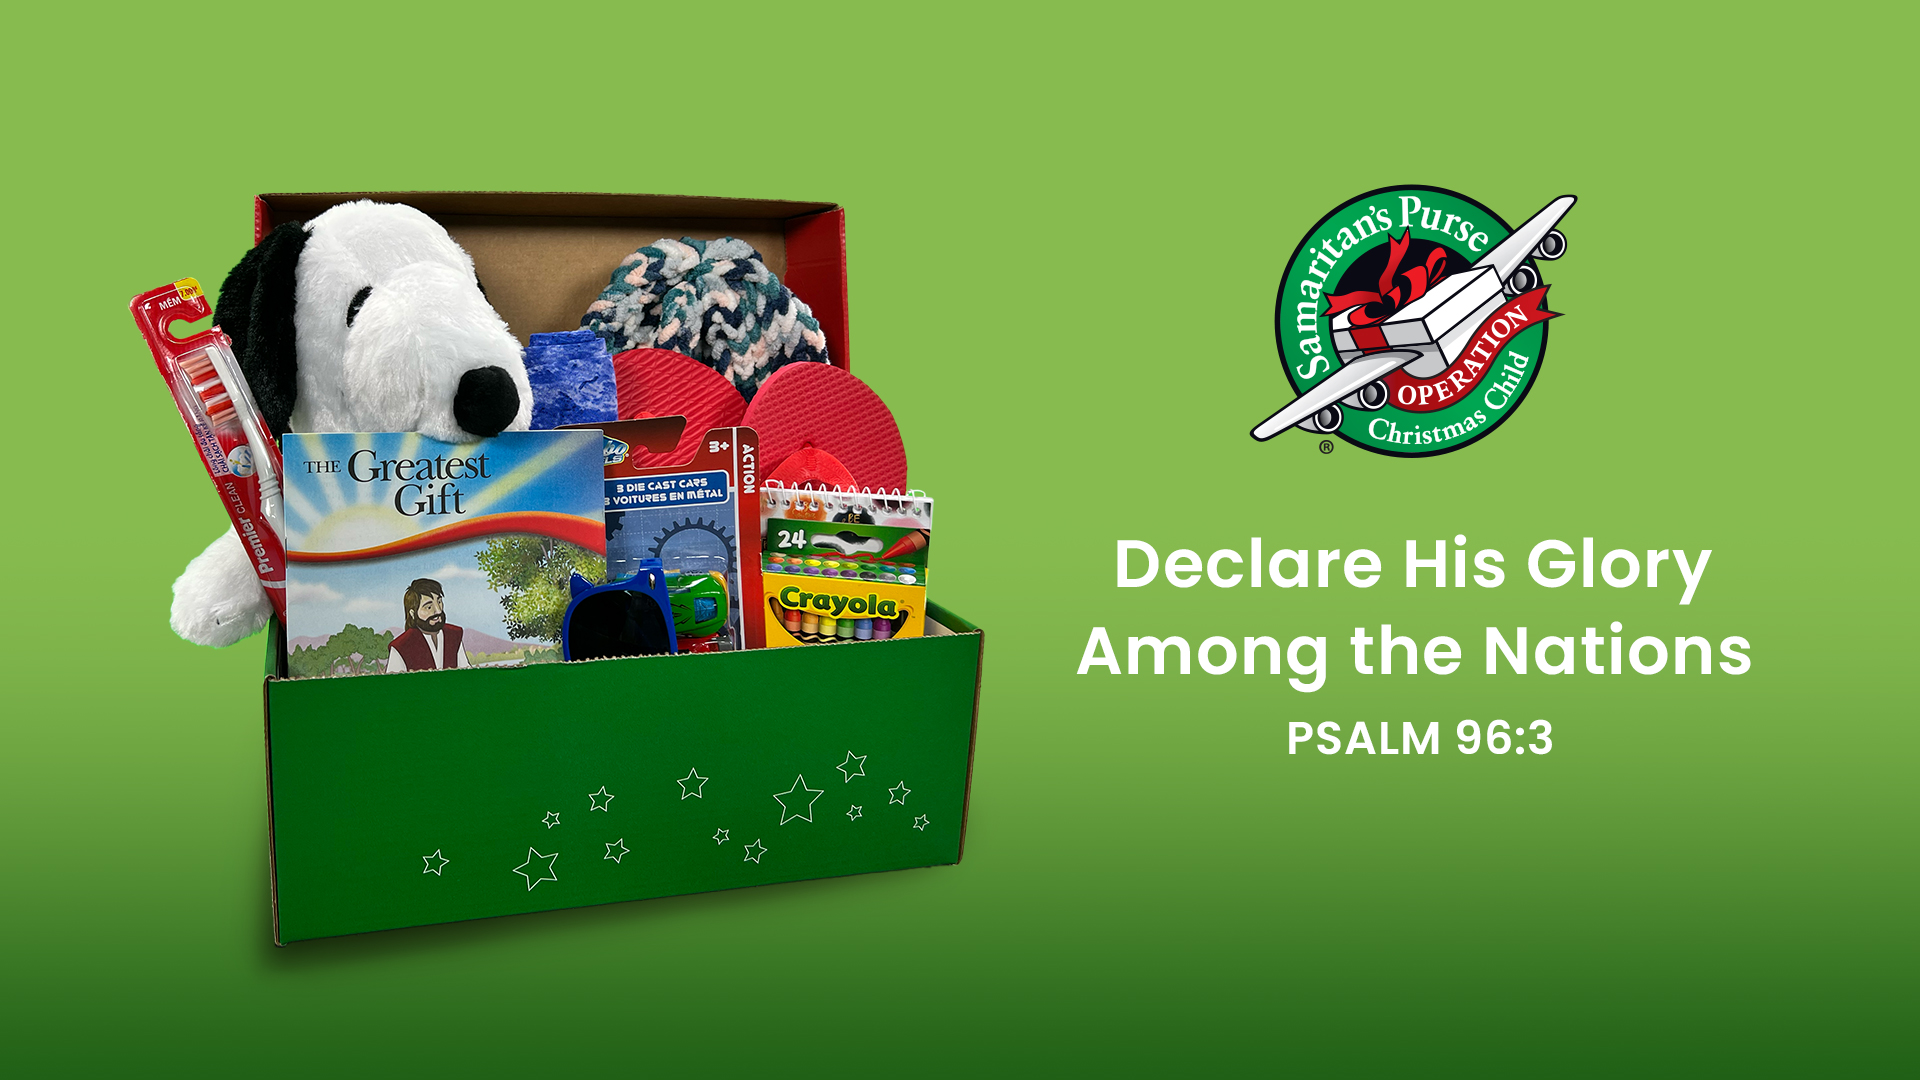 Operation Christmas Child, Declare His Glory Among the Nations